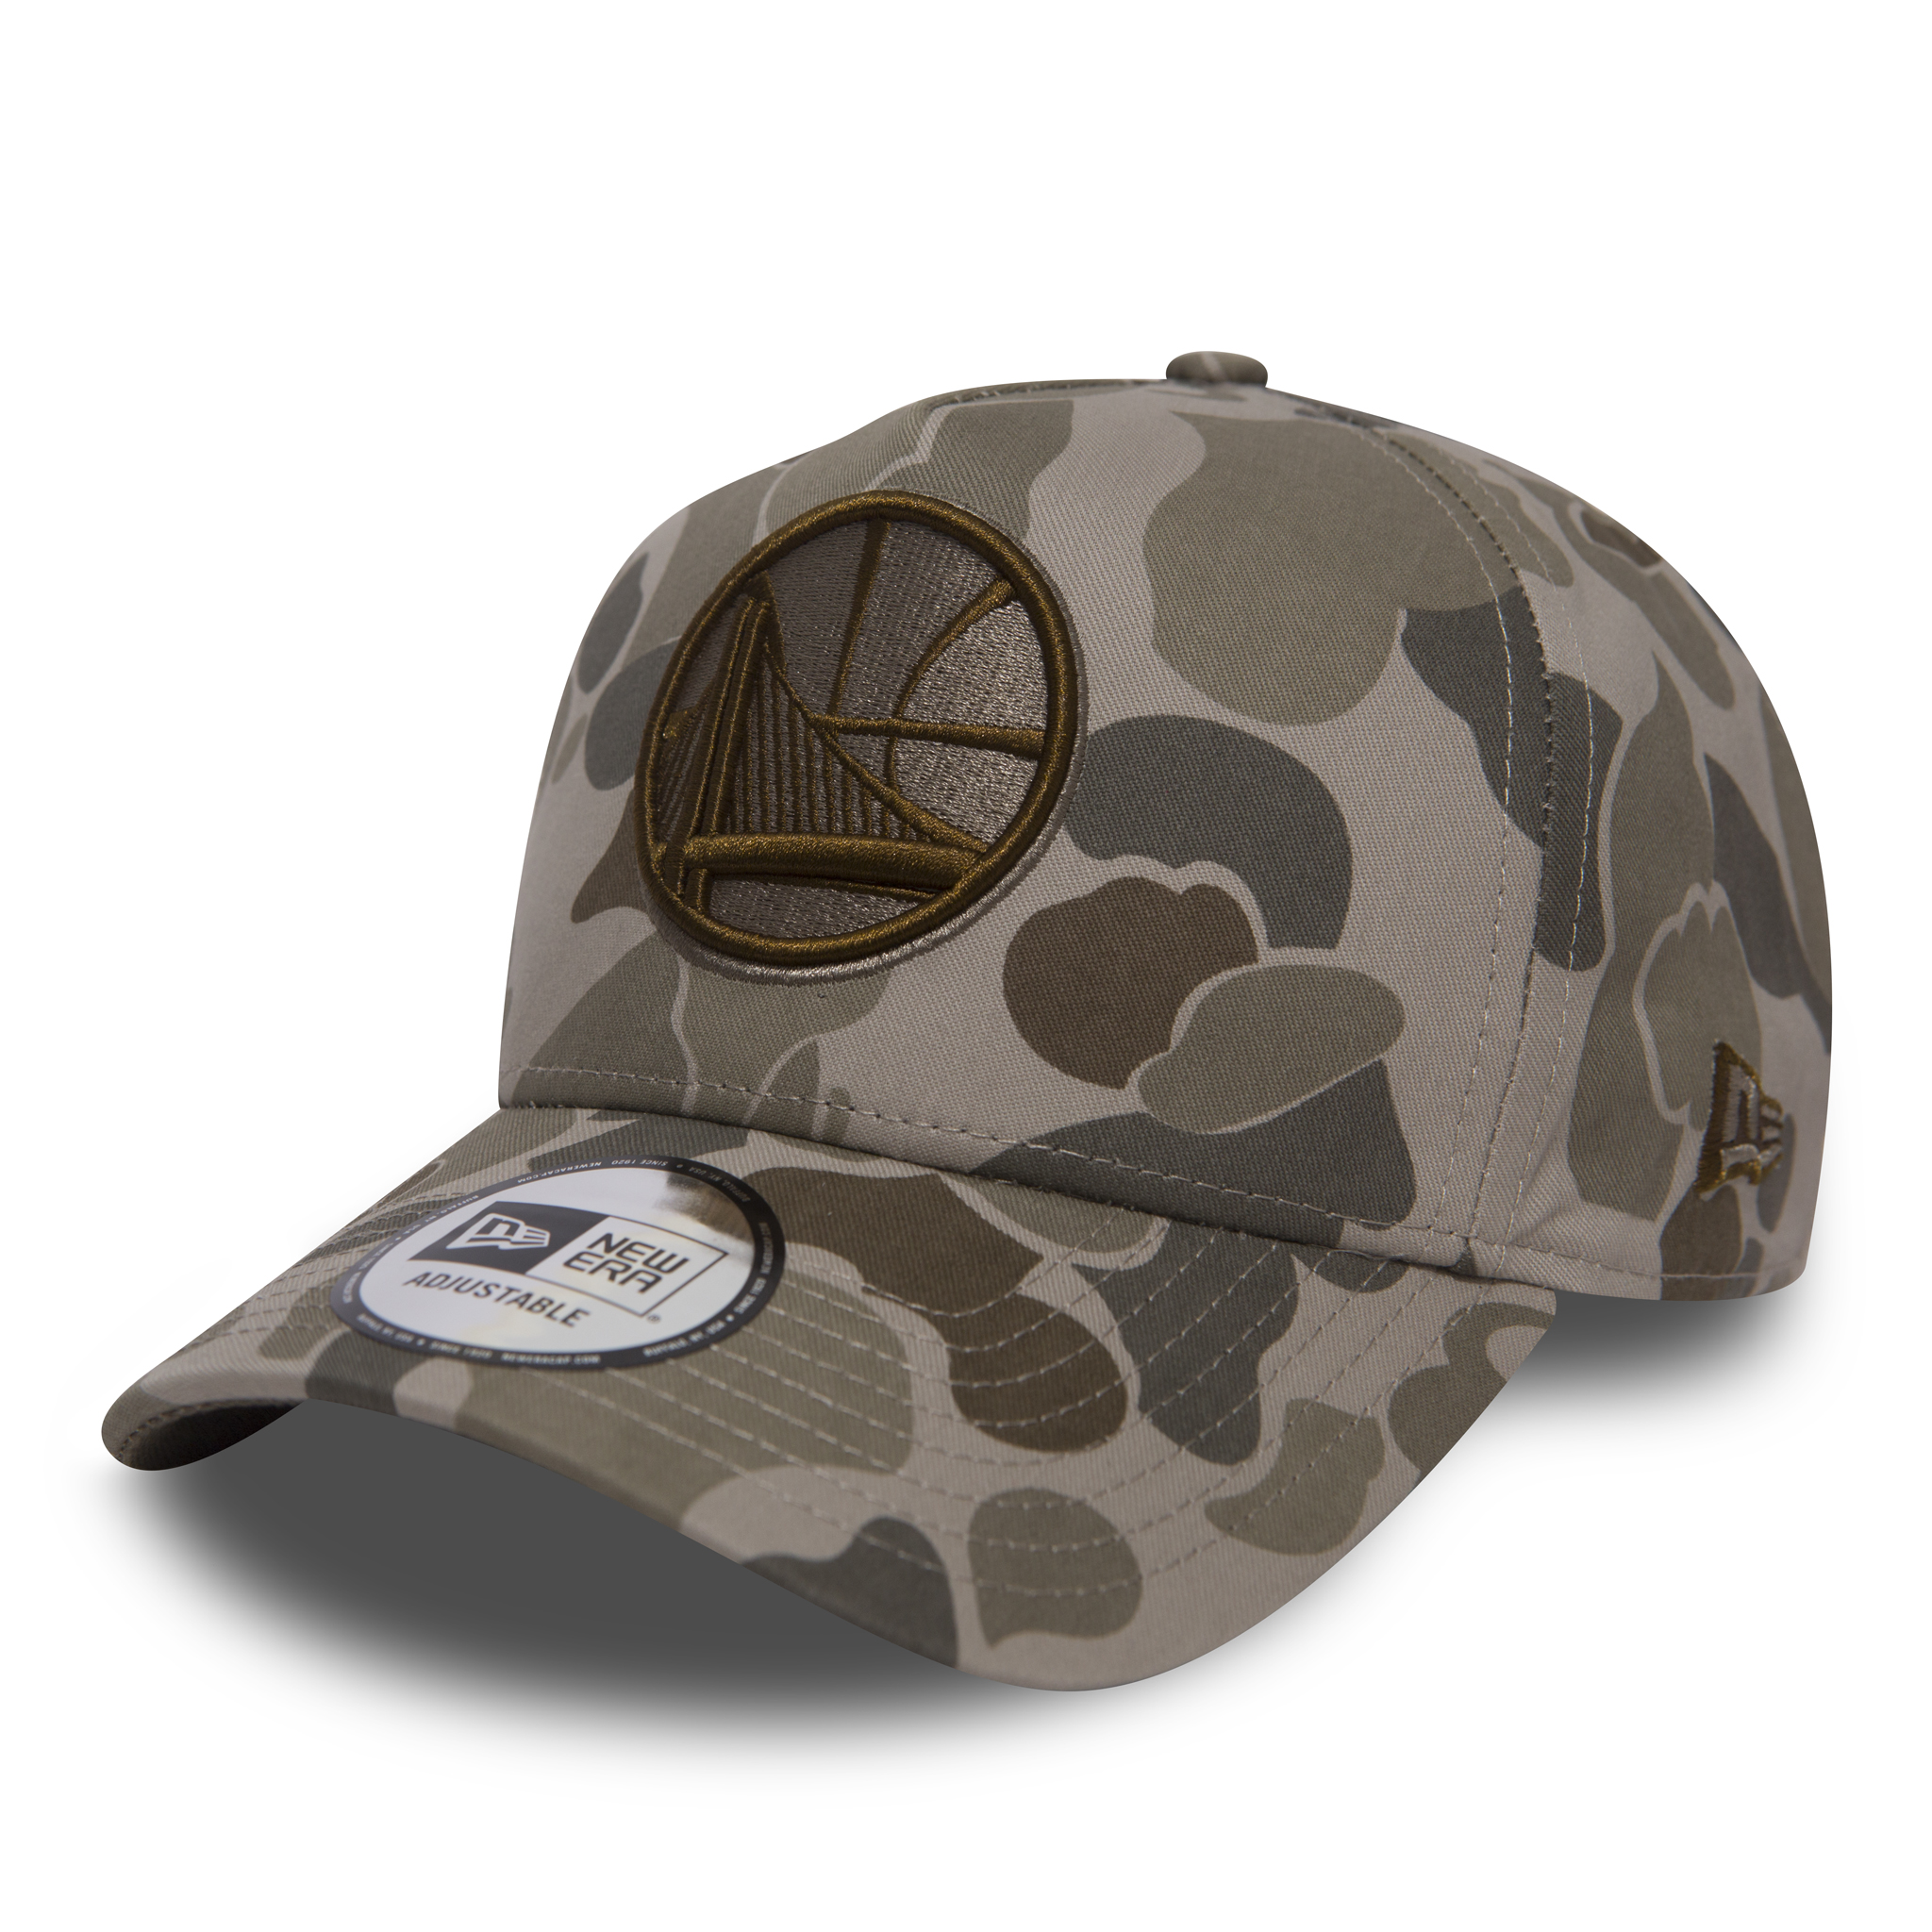 Golden State Warriors Camo 9FORTY A-Frame Cap